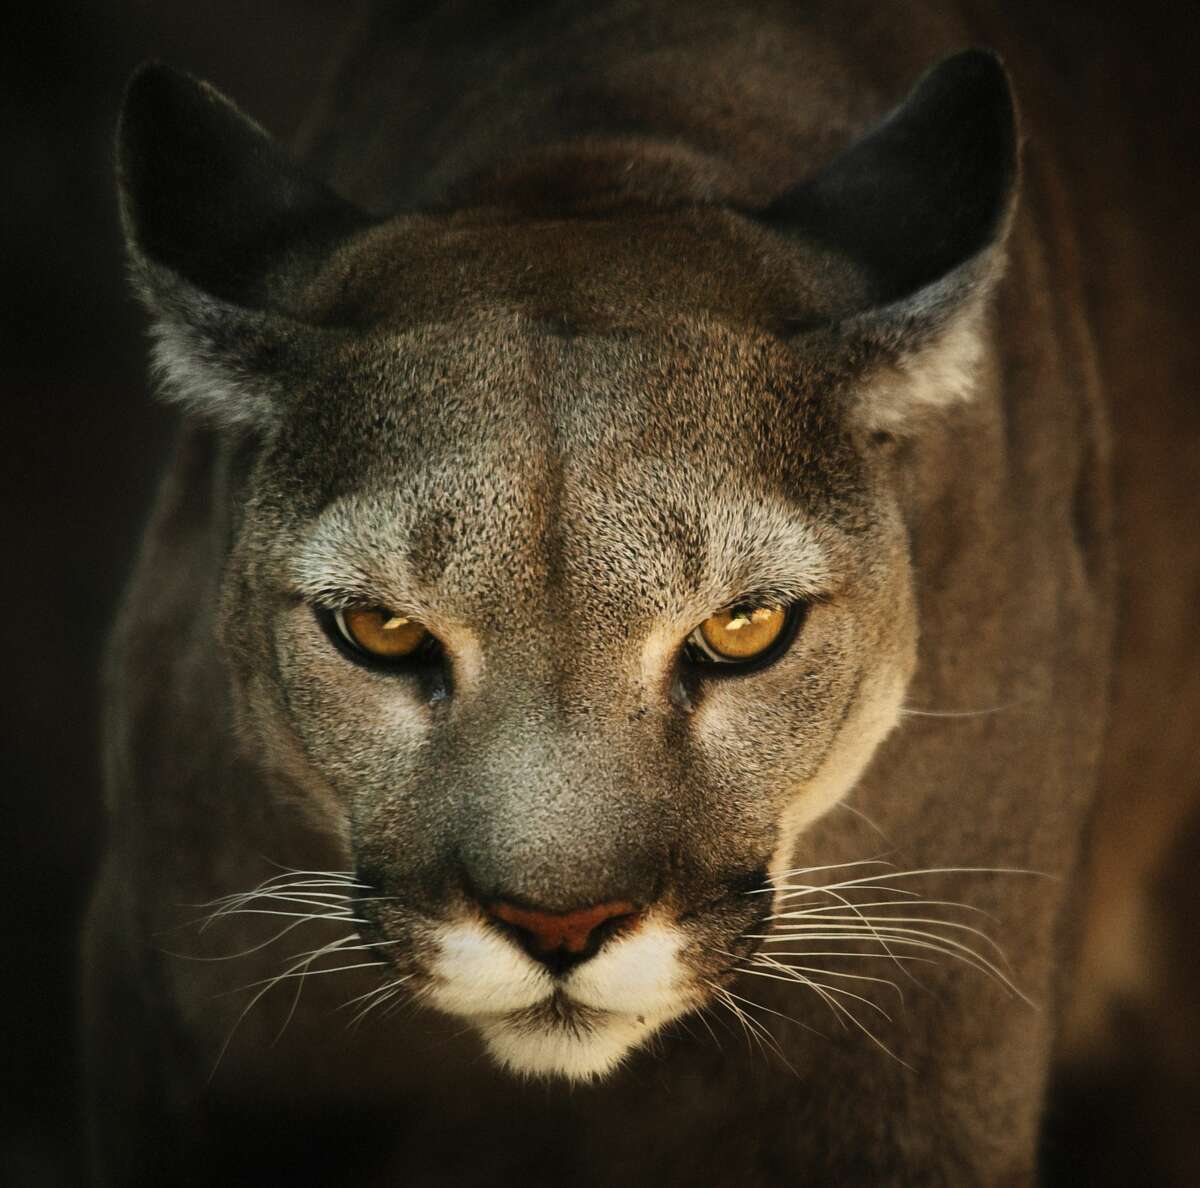 Despite being surrounded by mountains — with mountain lions in them — if you call them this, we know you're an outsider. In Washington we call these big cats cougars.